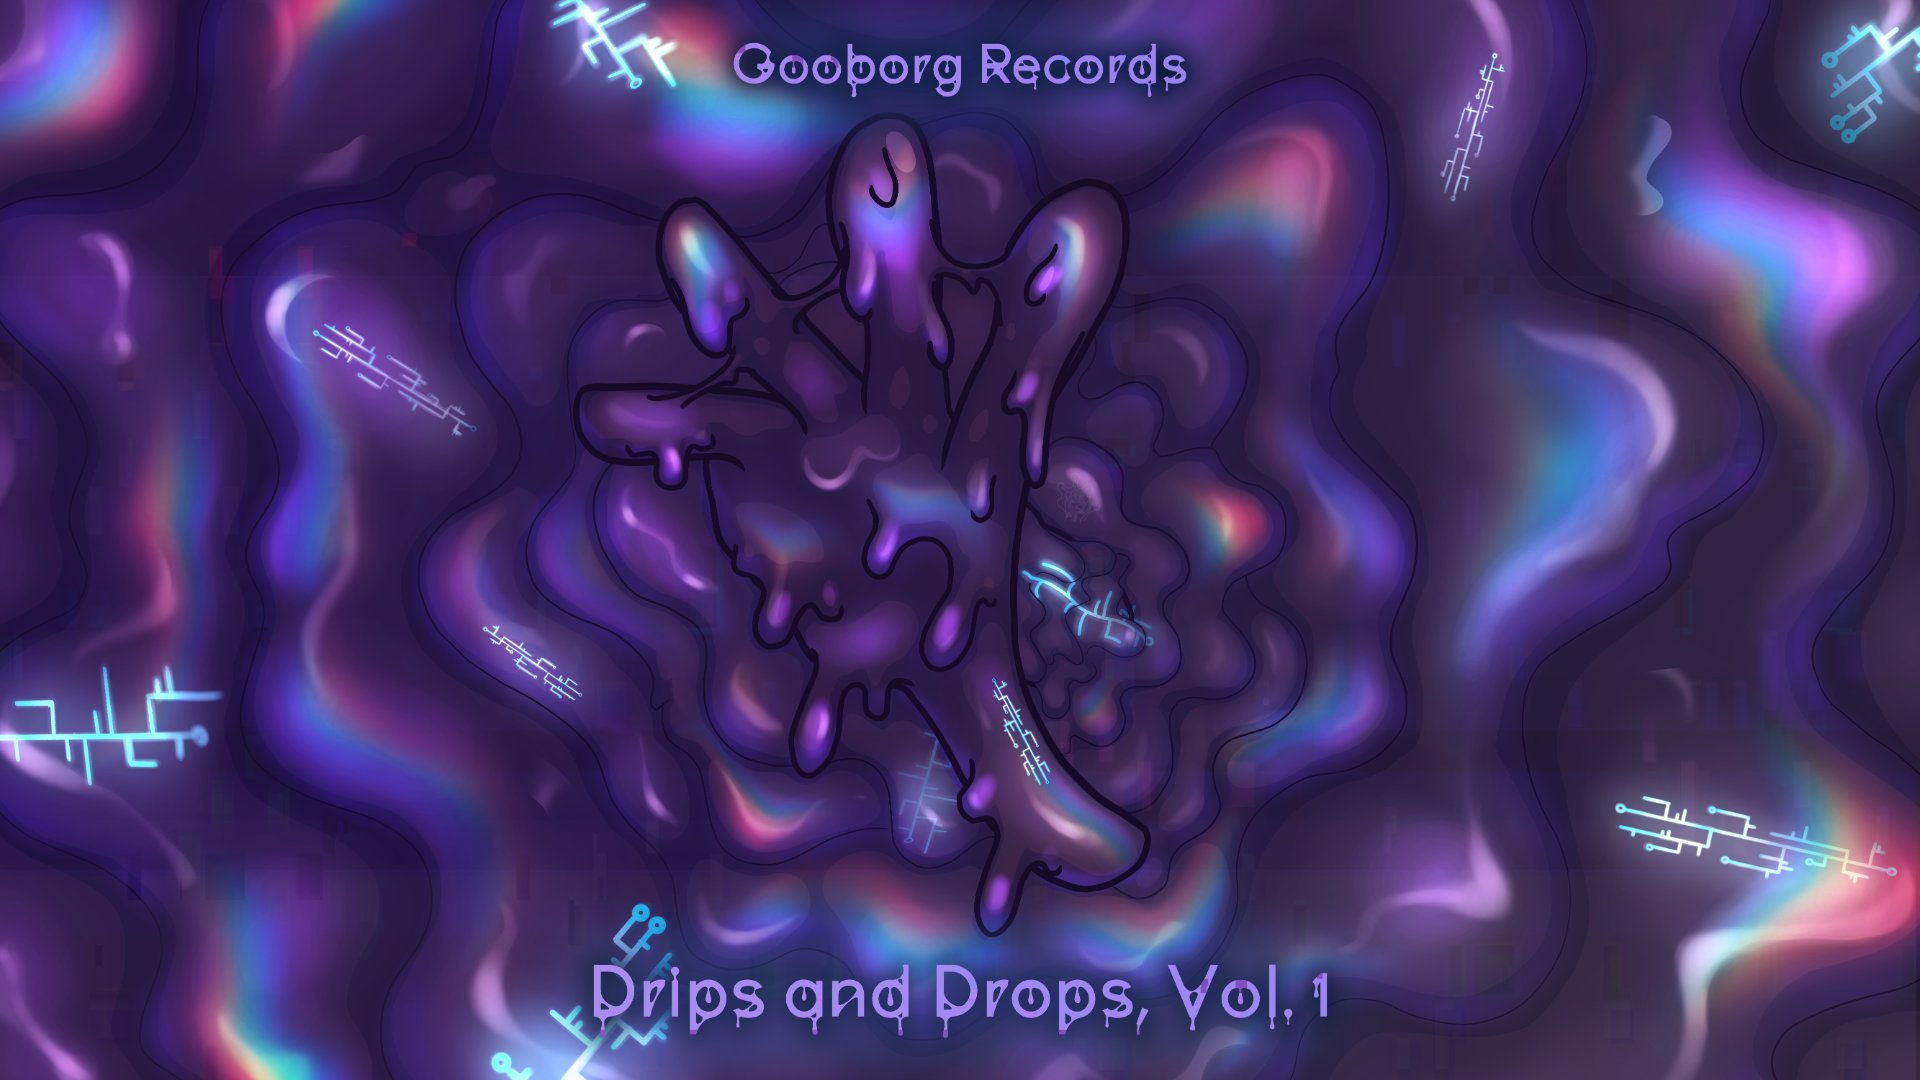 Album cover for Drips and Drops Vol. 1 by Gooborg Records